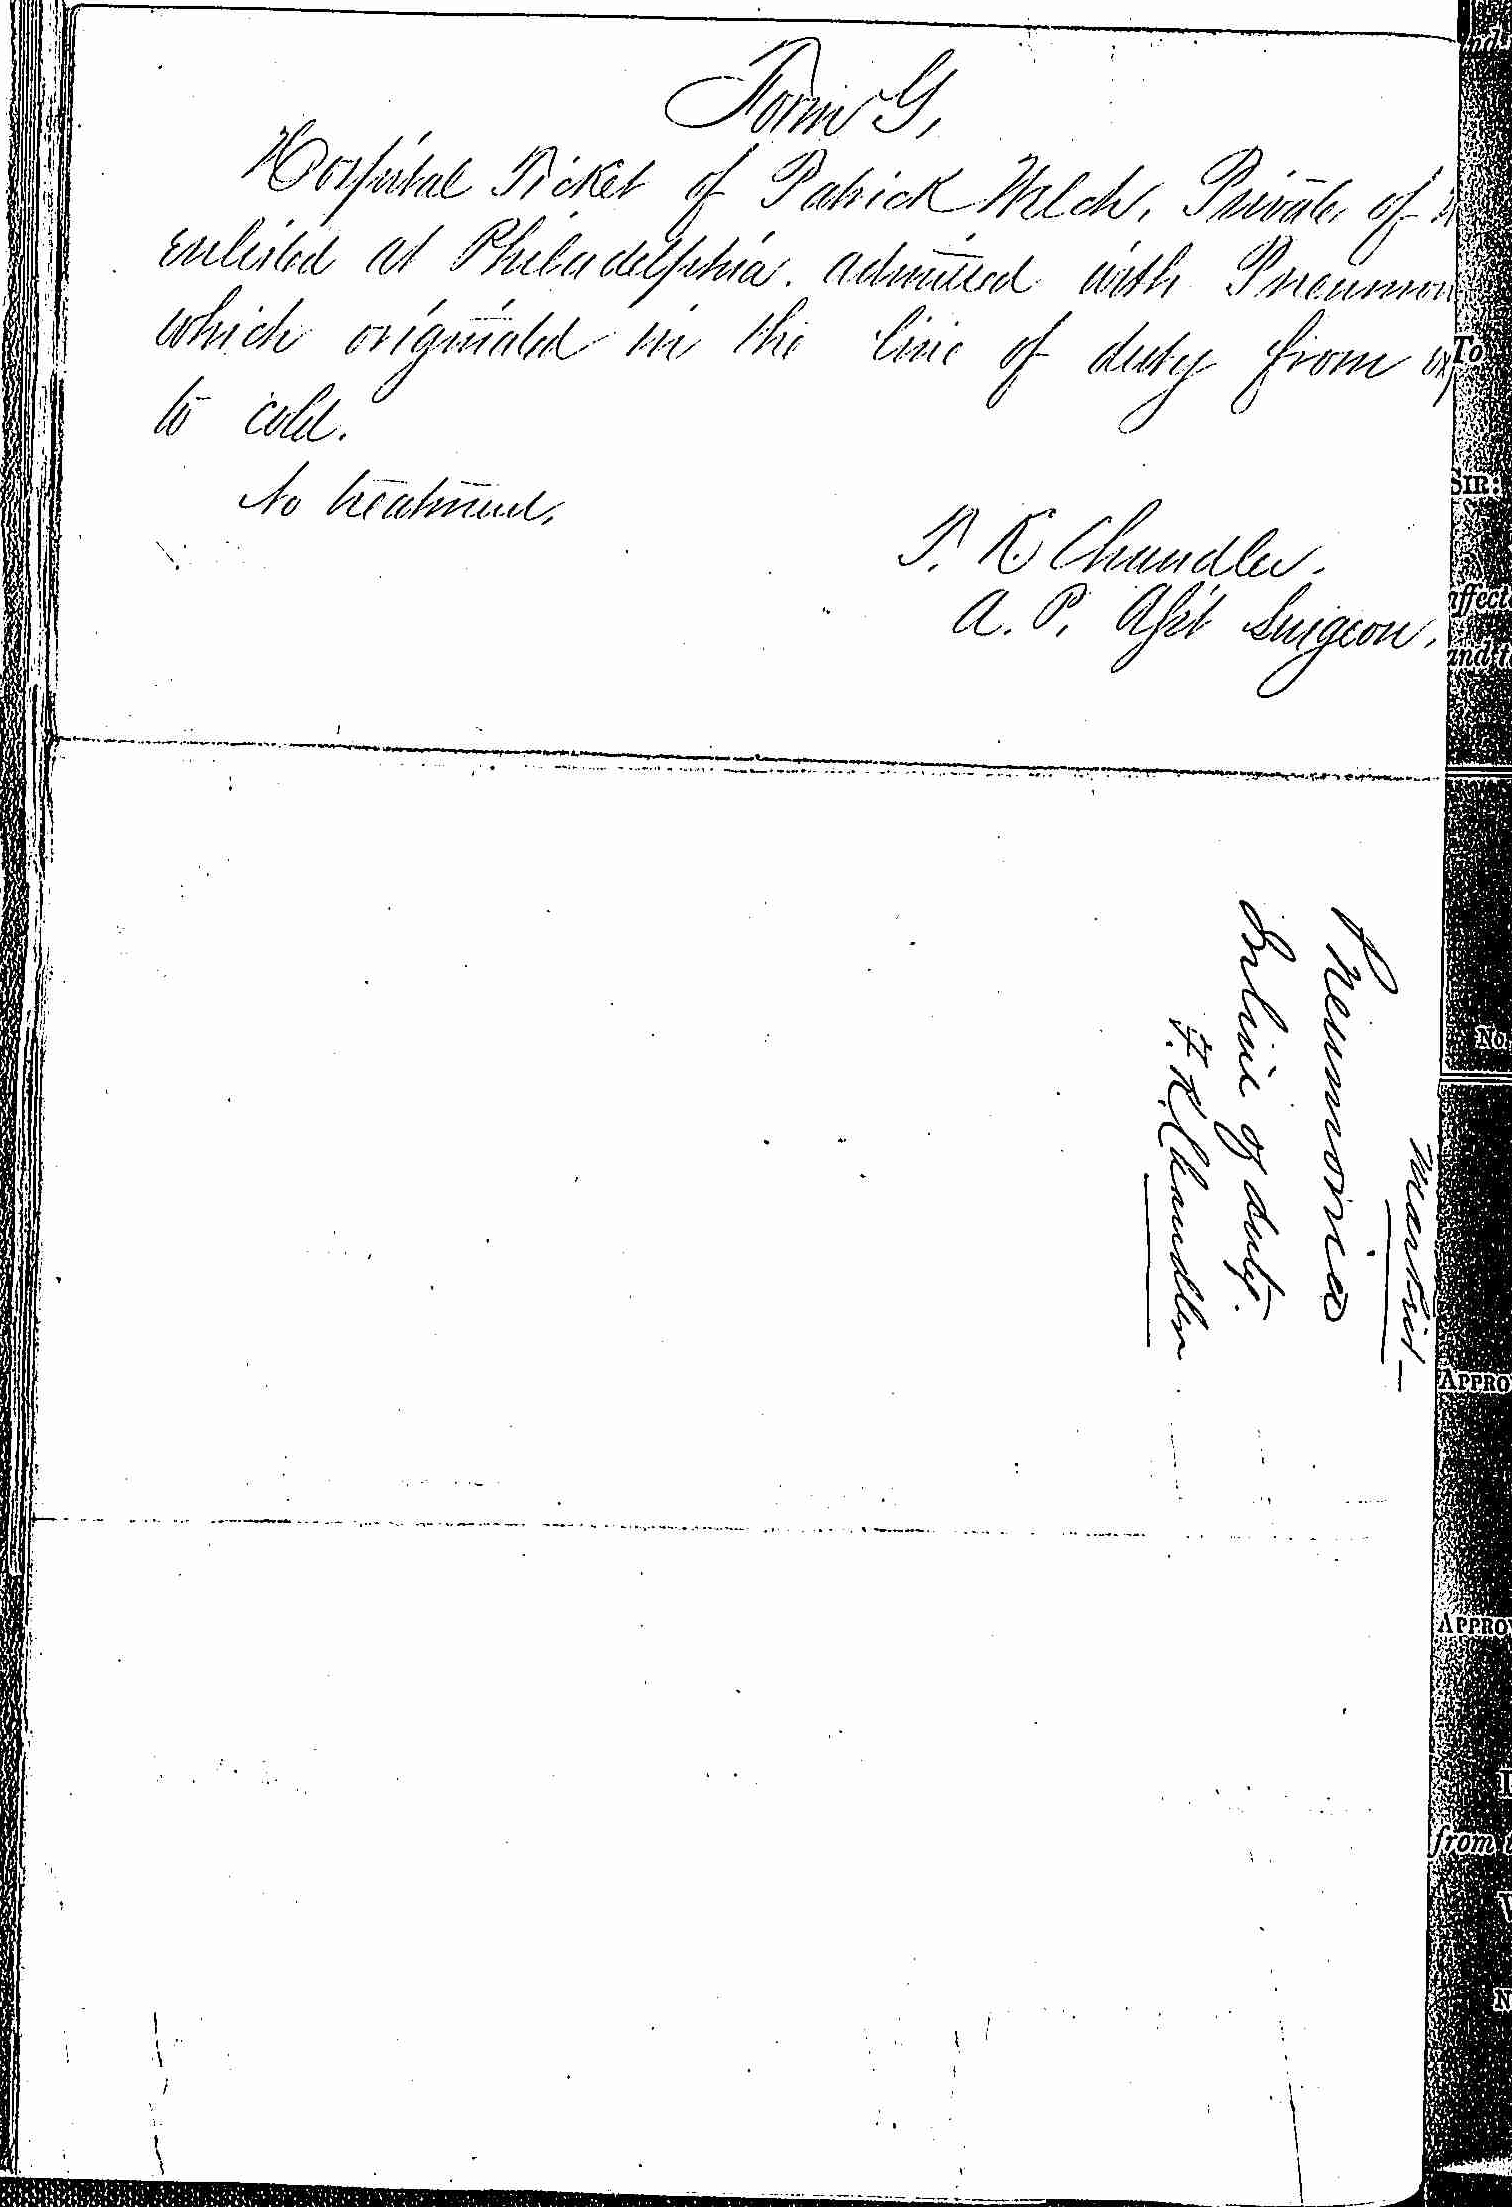 Entry for Patrick Welch (page 2 of 2) in the log Hospital Tickets and Case Papers - Naval Hospital - Washington, D.C. - 1865-68